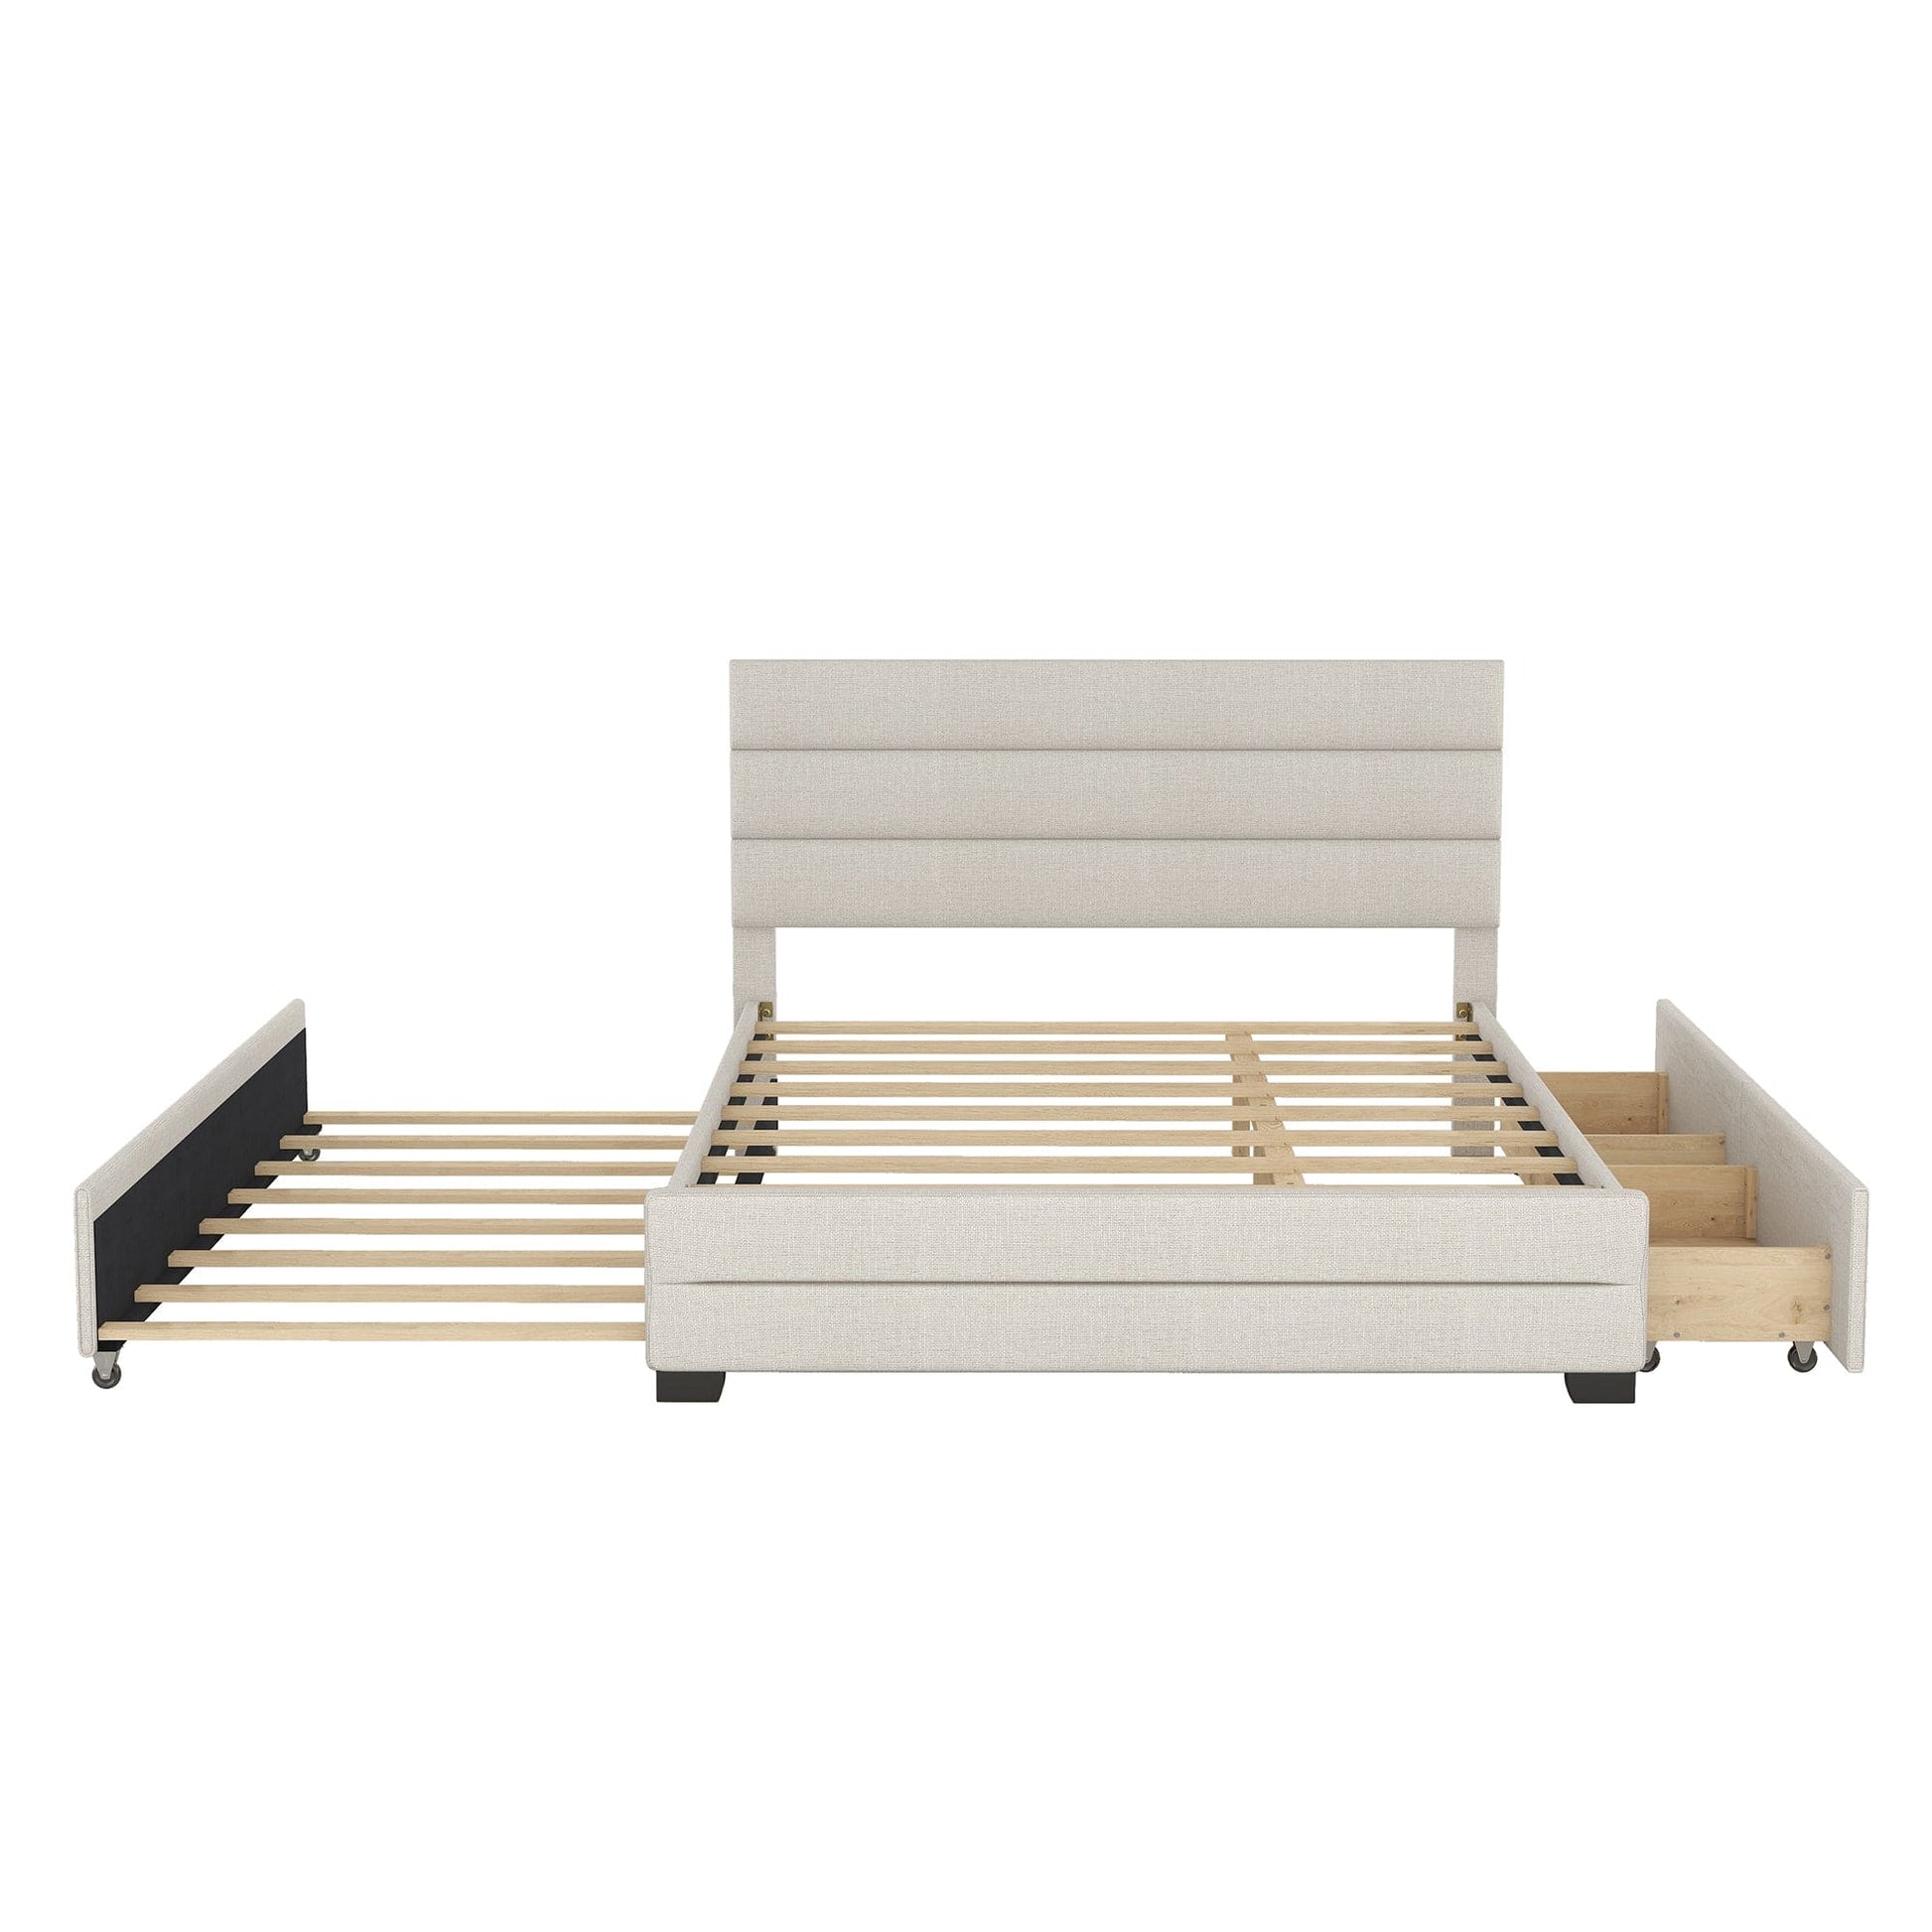 1st Choice Furniture Direct Queen Bed 1st Choice Beige Queen Platform Bed with Trundle and 2 Drawers